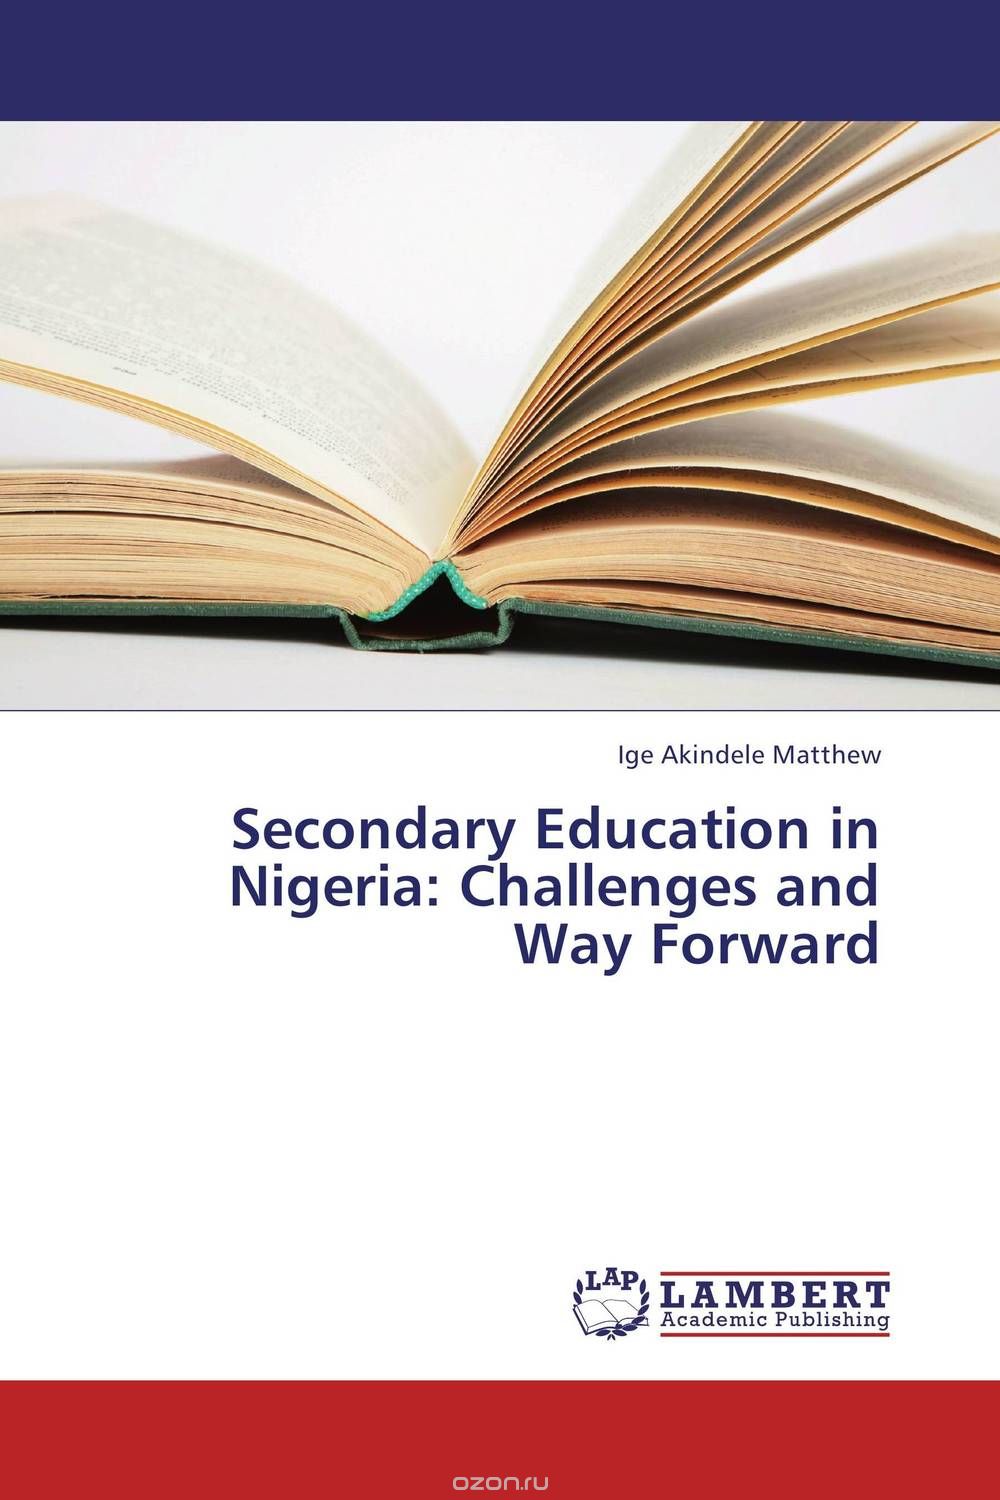 Secondary Education in Nigeria: Challenges and Way Forward